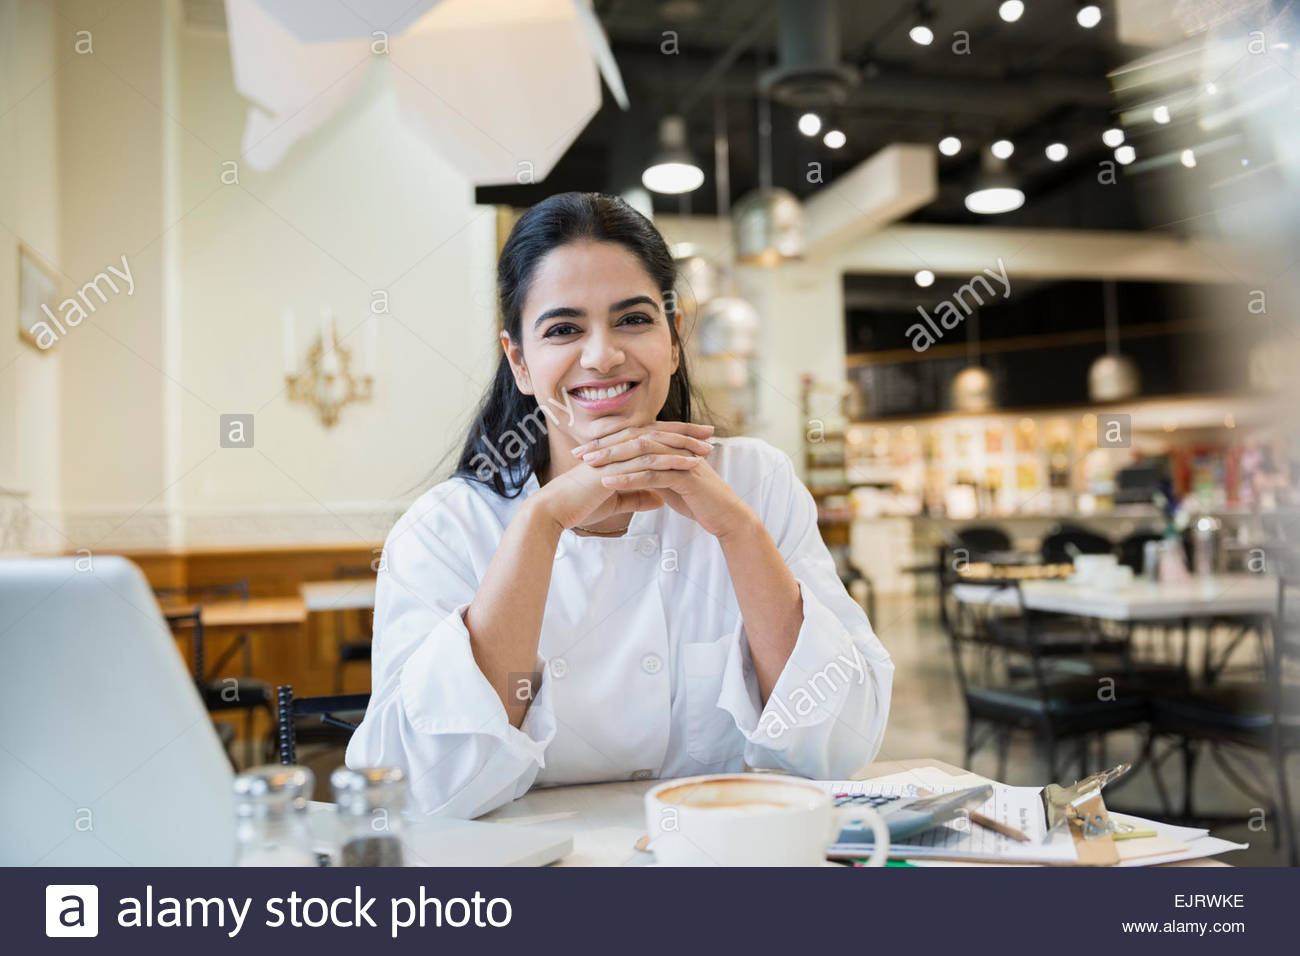 Portrait of smiling chef at laptop in cafe Stock Photo